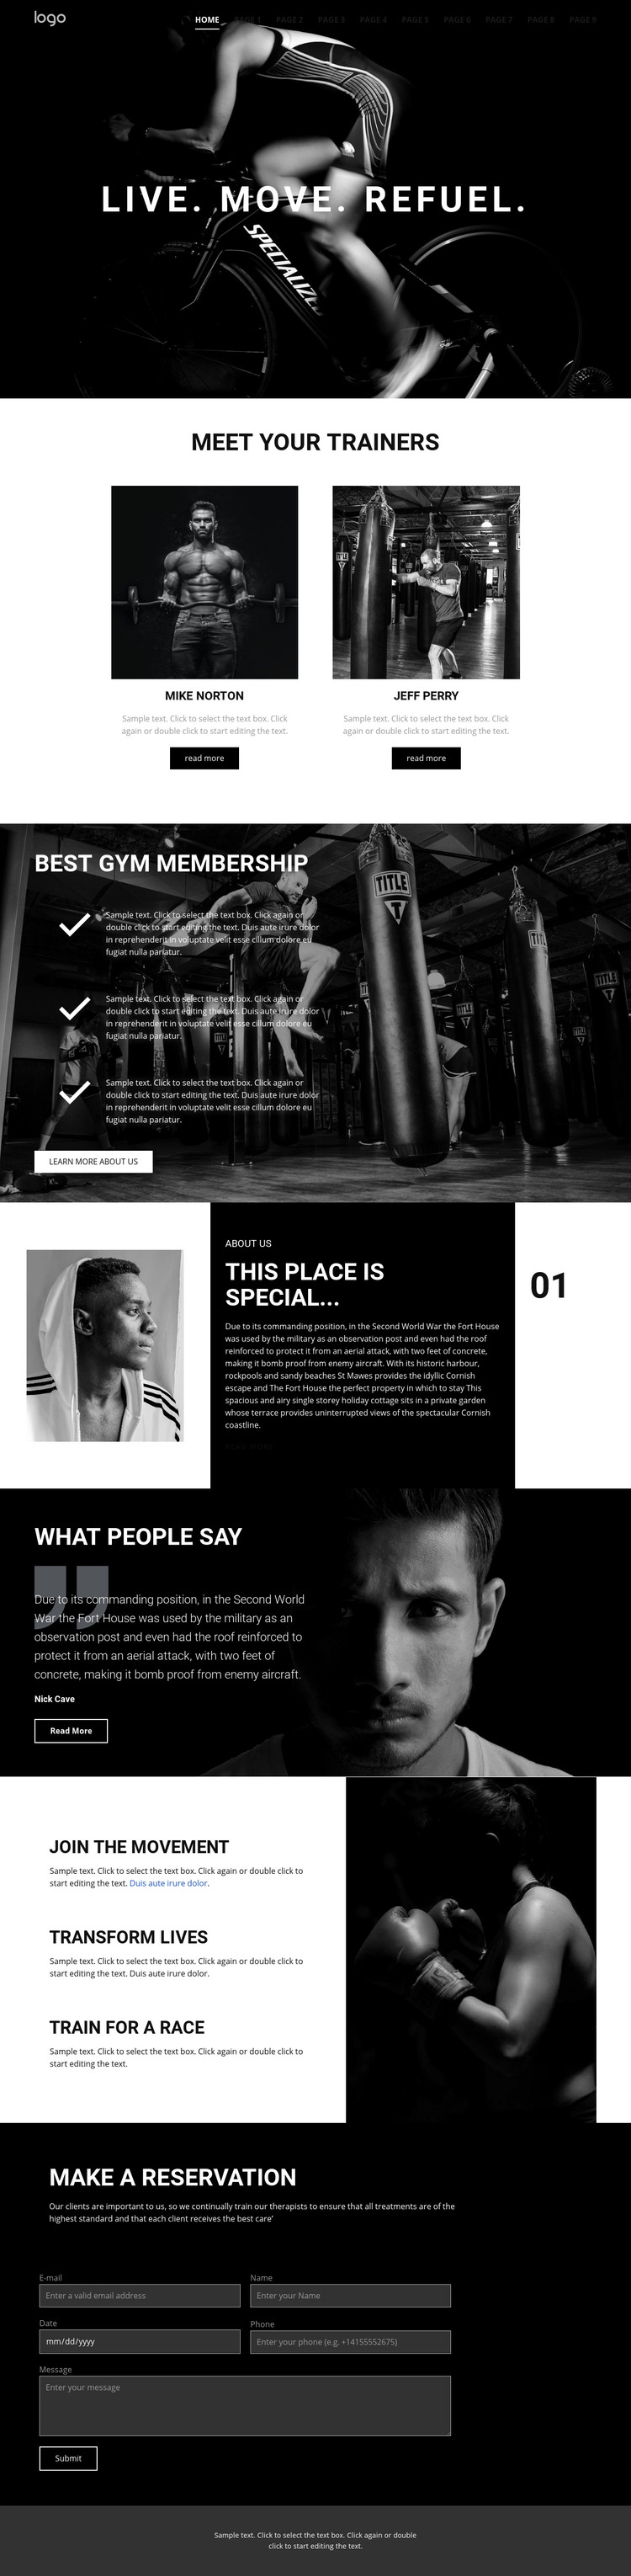 Refuel at power gym Homepage Design